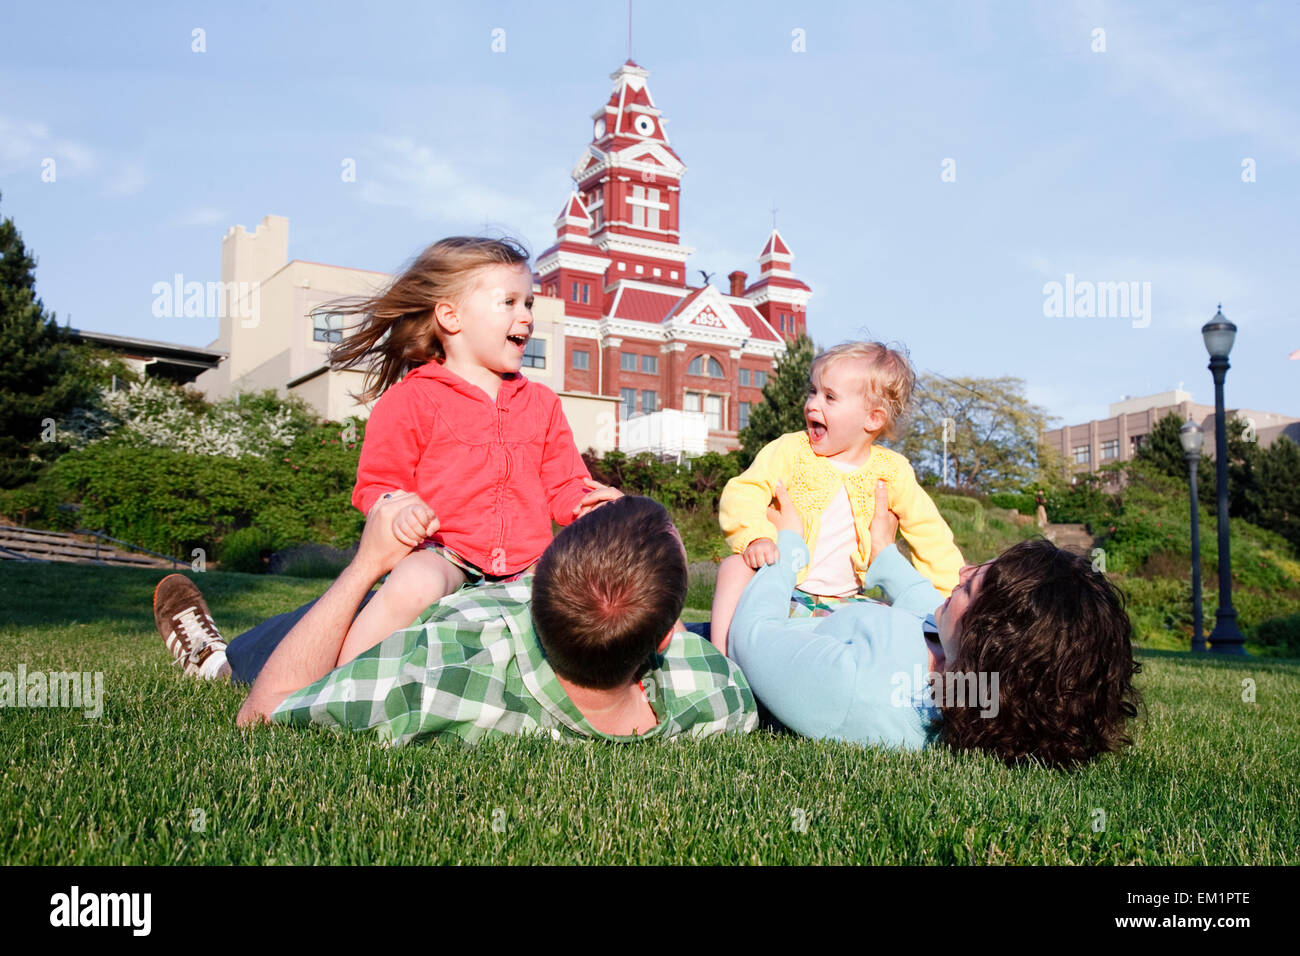 Two Daughters Play With Parents In Grass; Bellingham Washington United States Of America Stock Photo